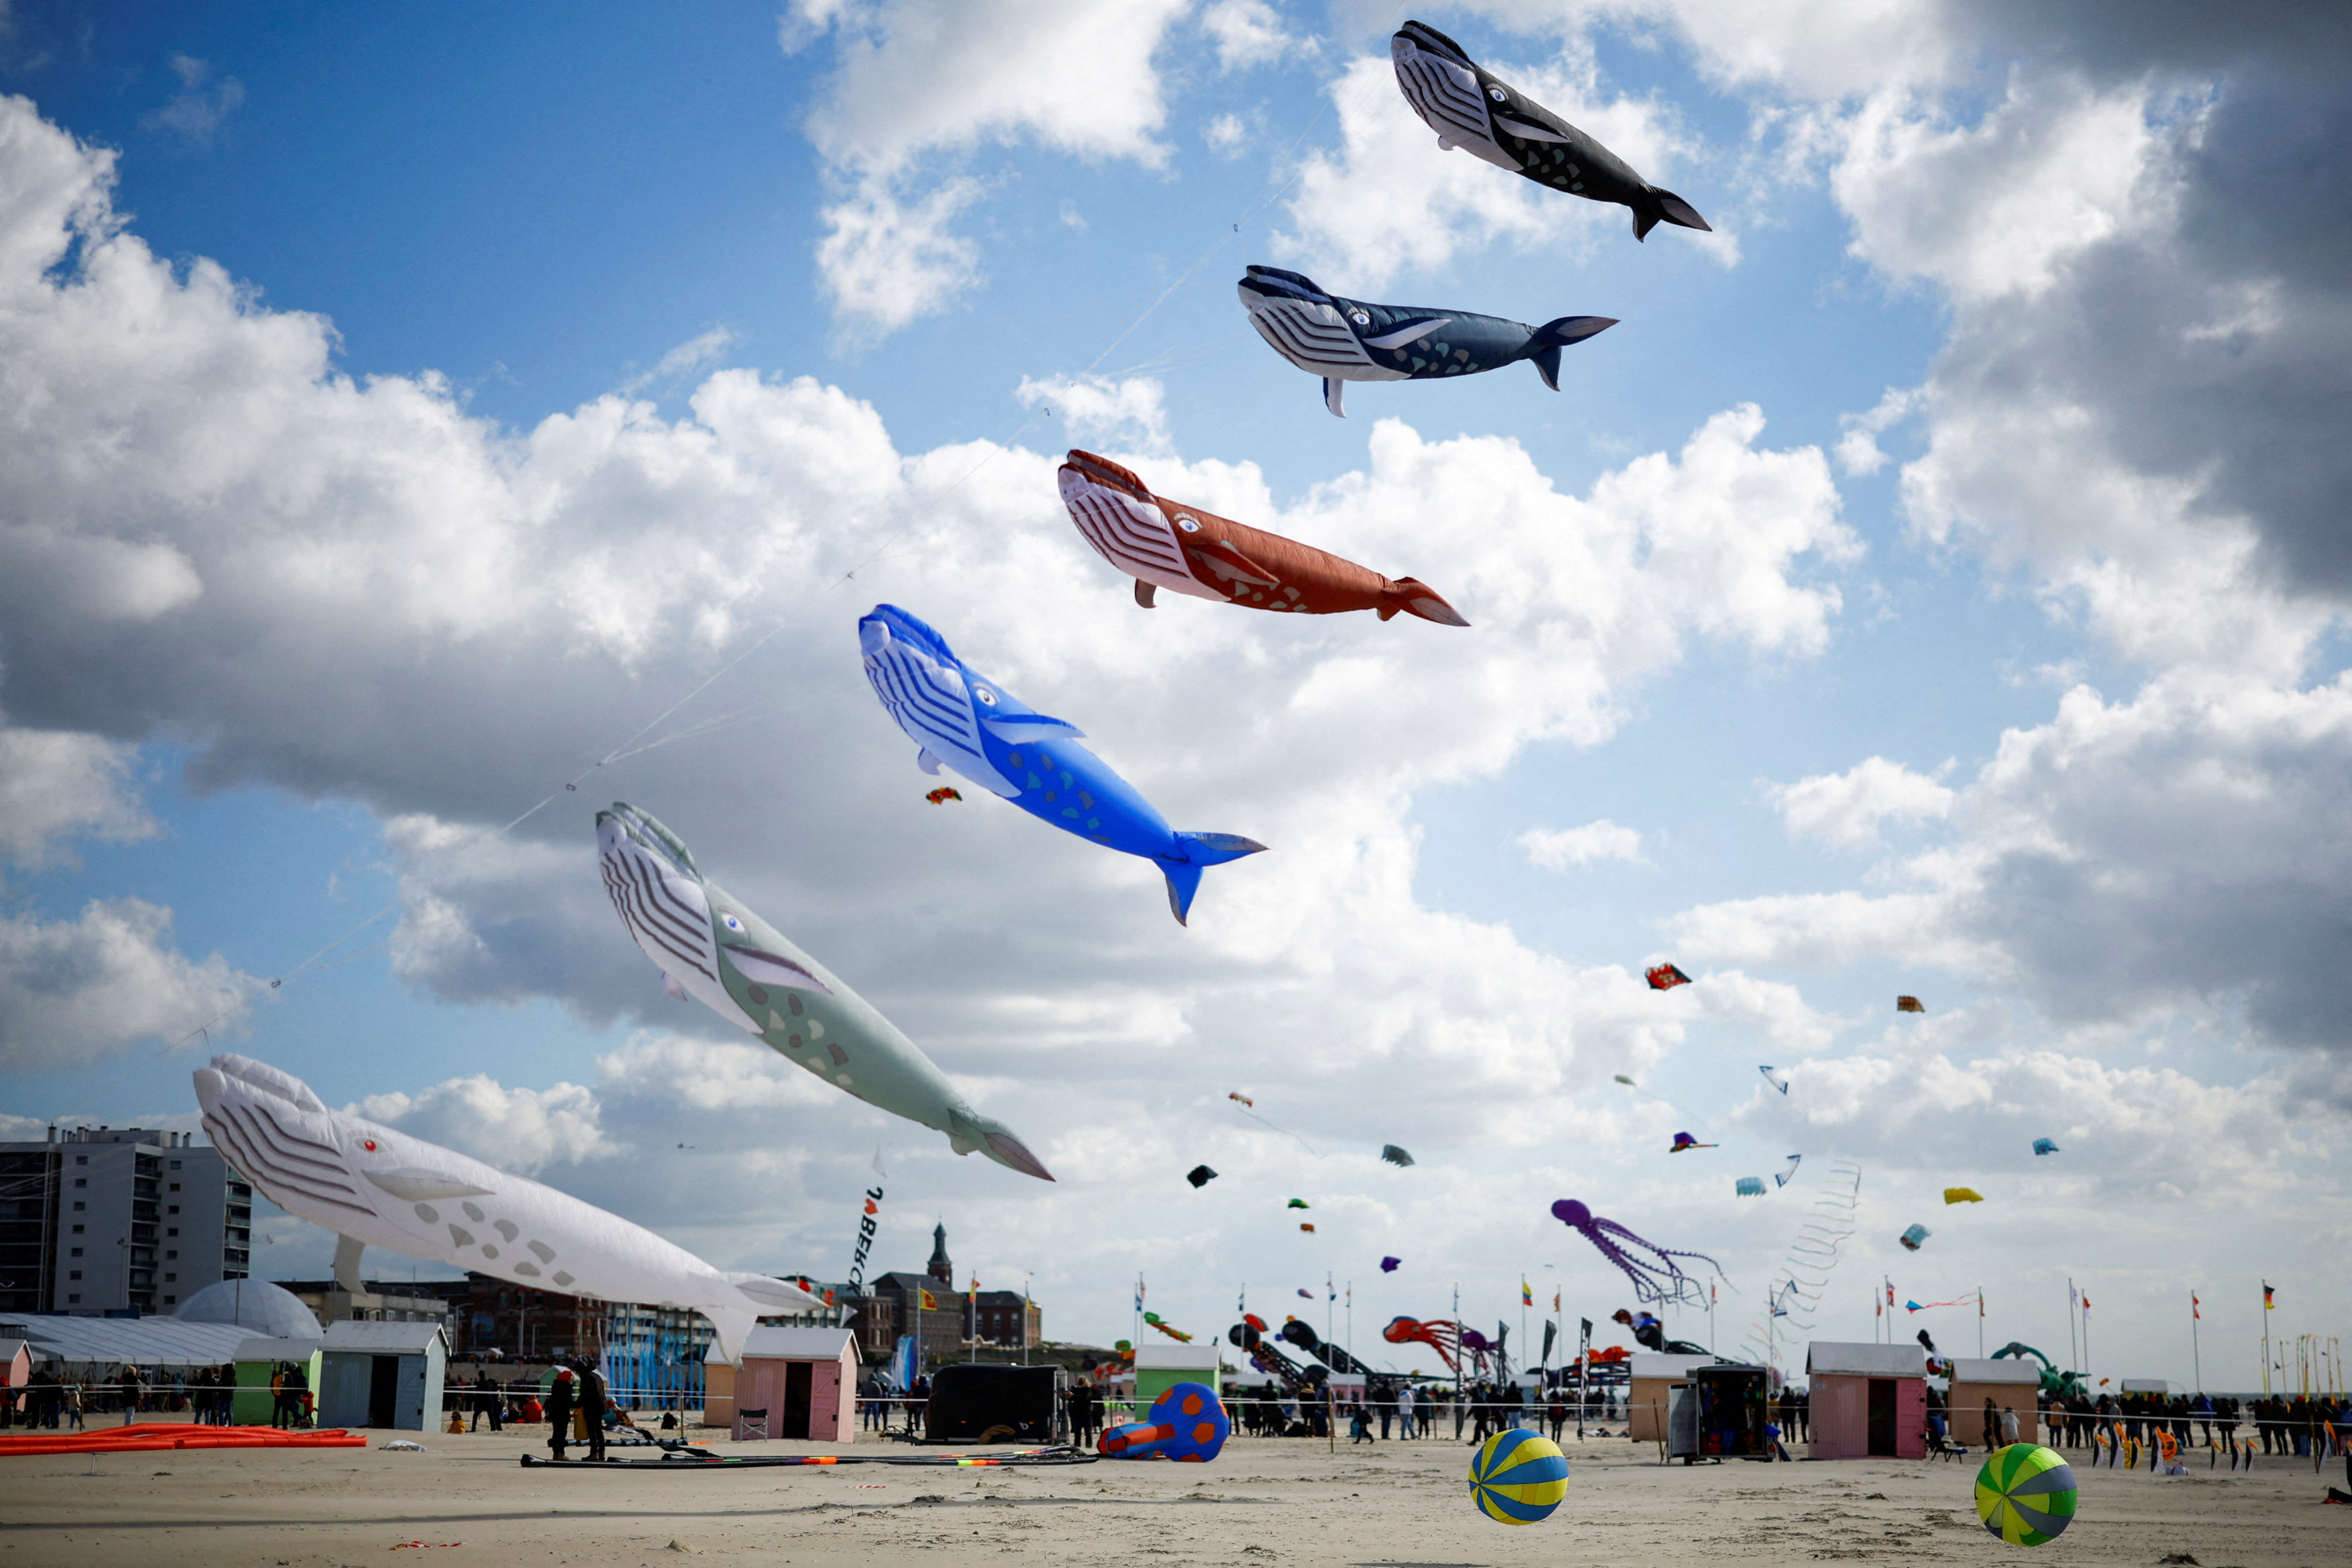 Kites fly over the beach during the 37th International Berck-sur-Mer Kite Festival. Photo: Reuters